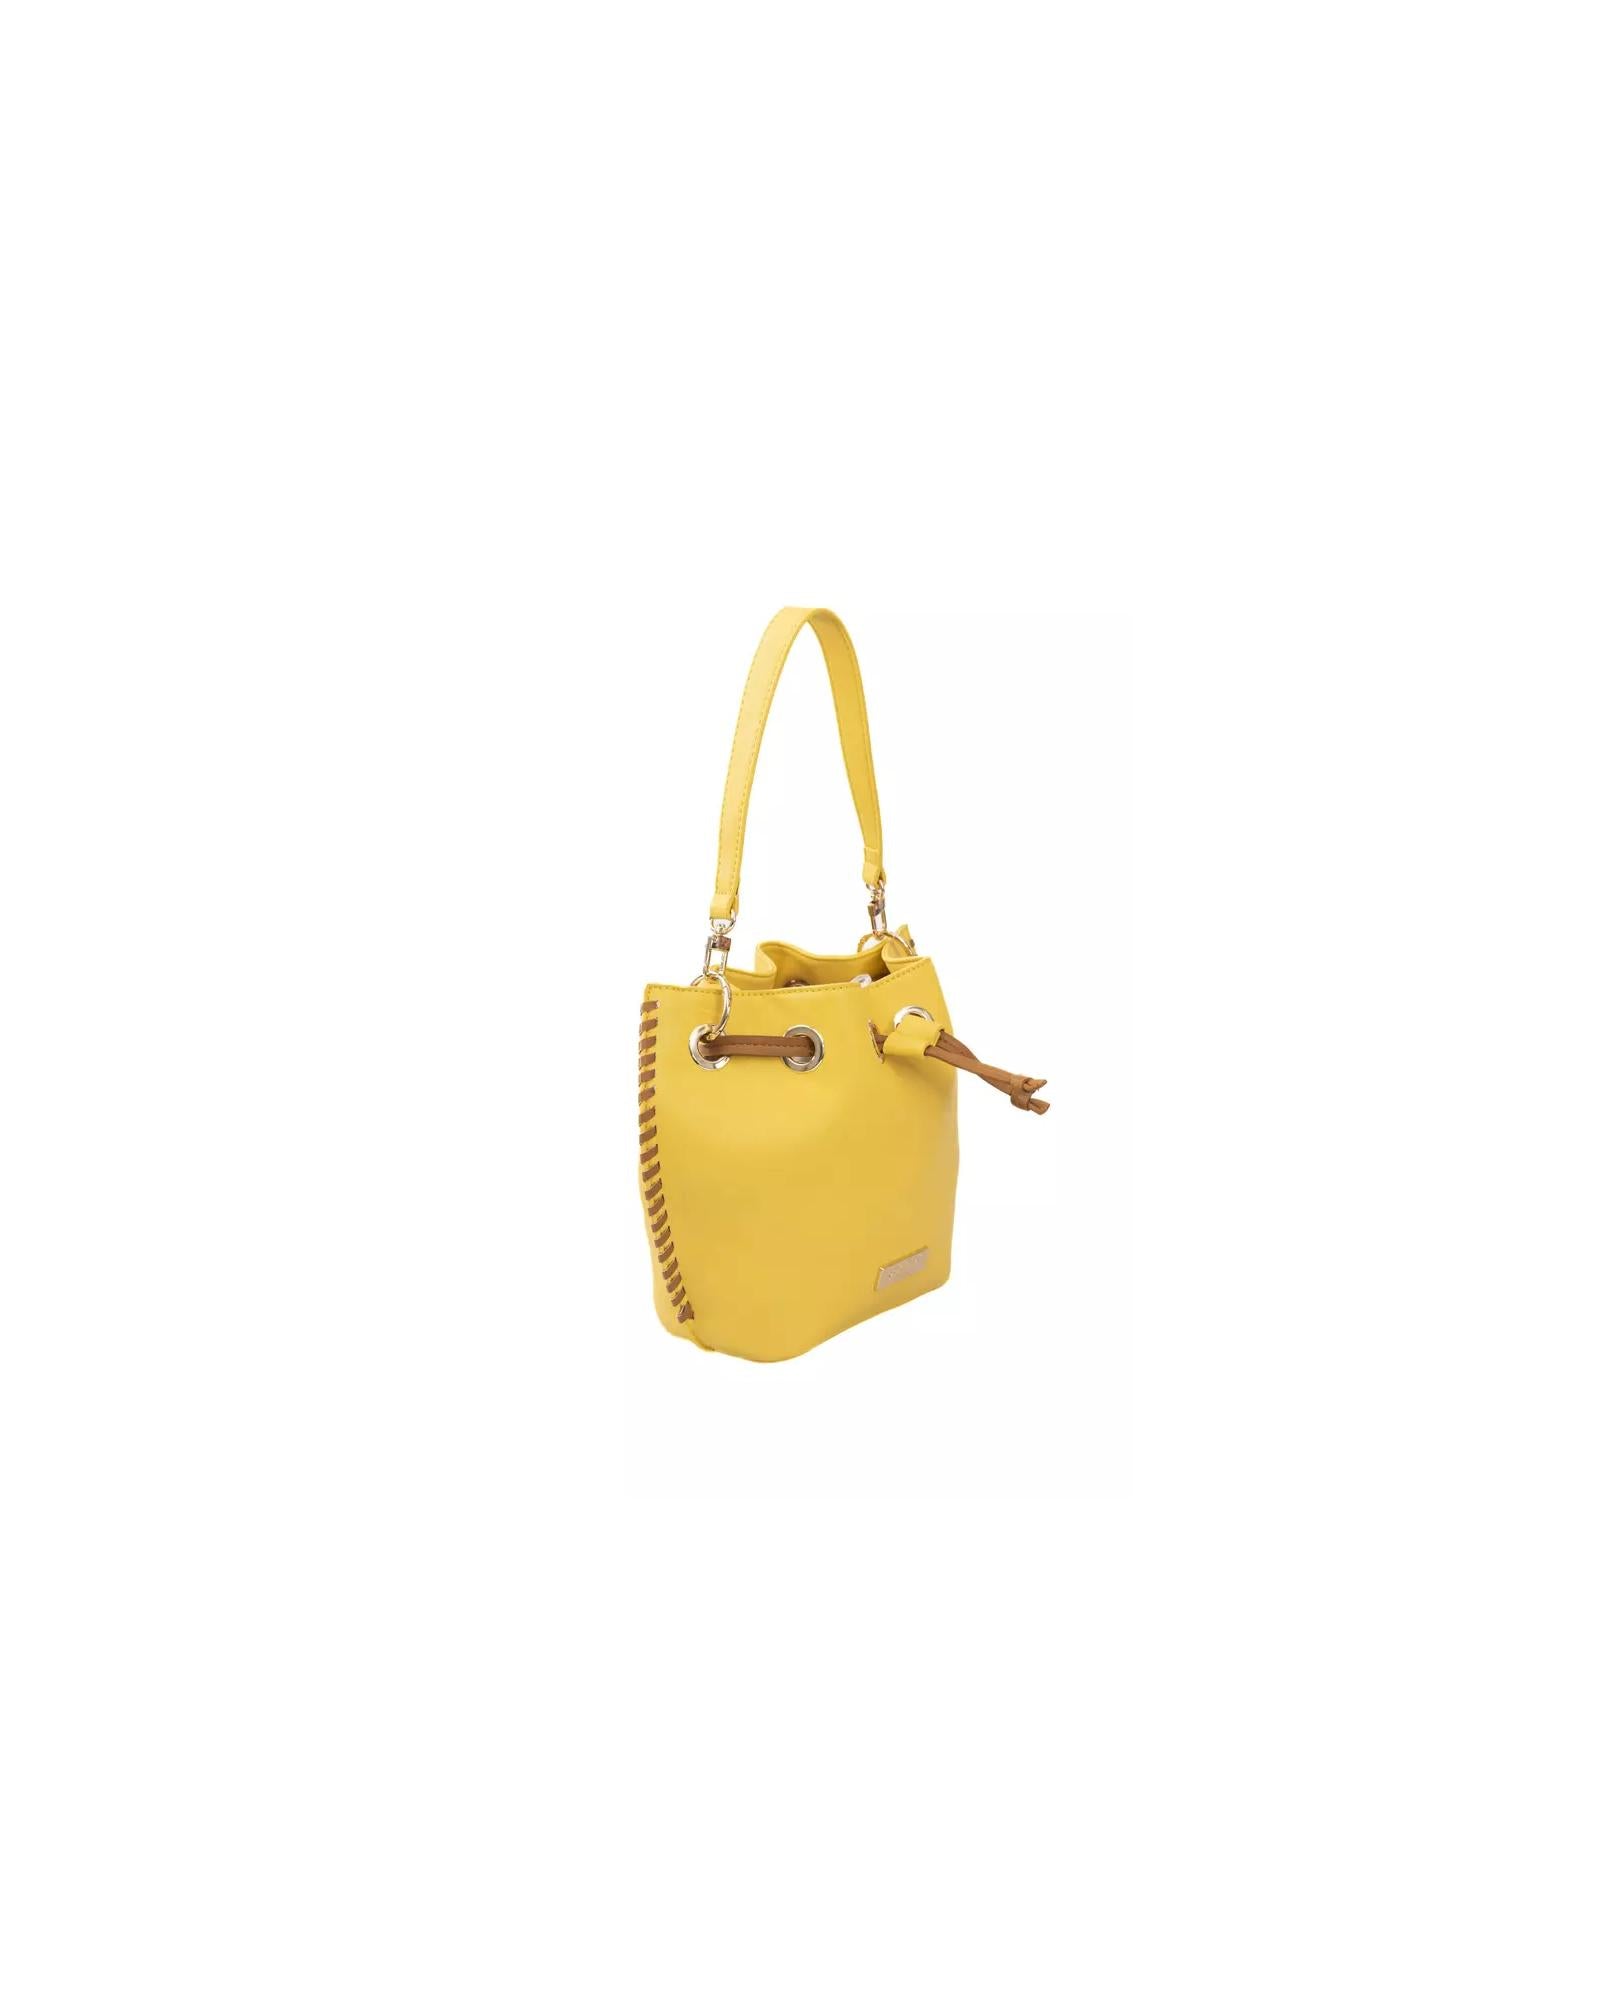 Golden Logoed Shoulder Bag with Drawstring Closure and Internal Compartments One Size Women